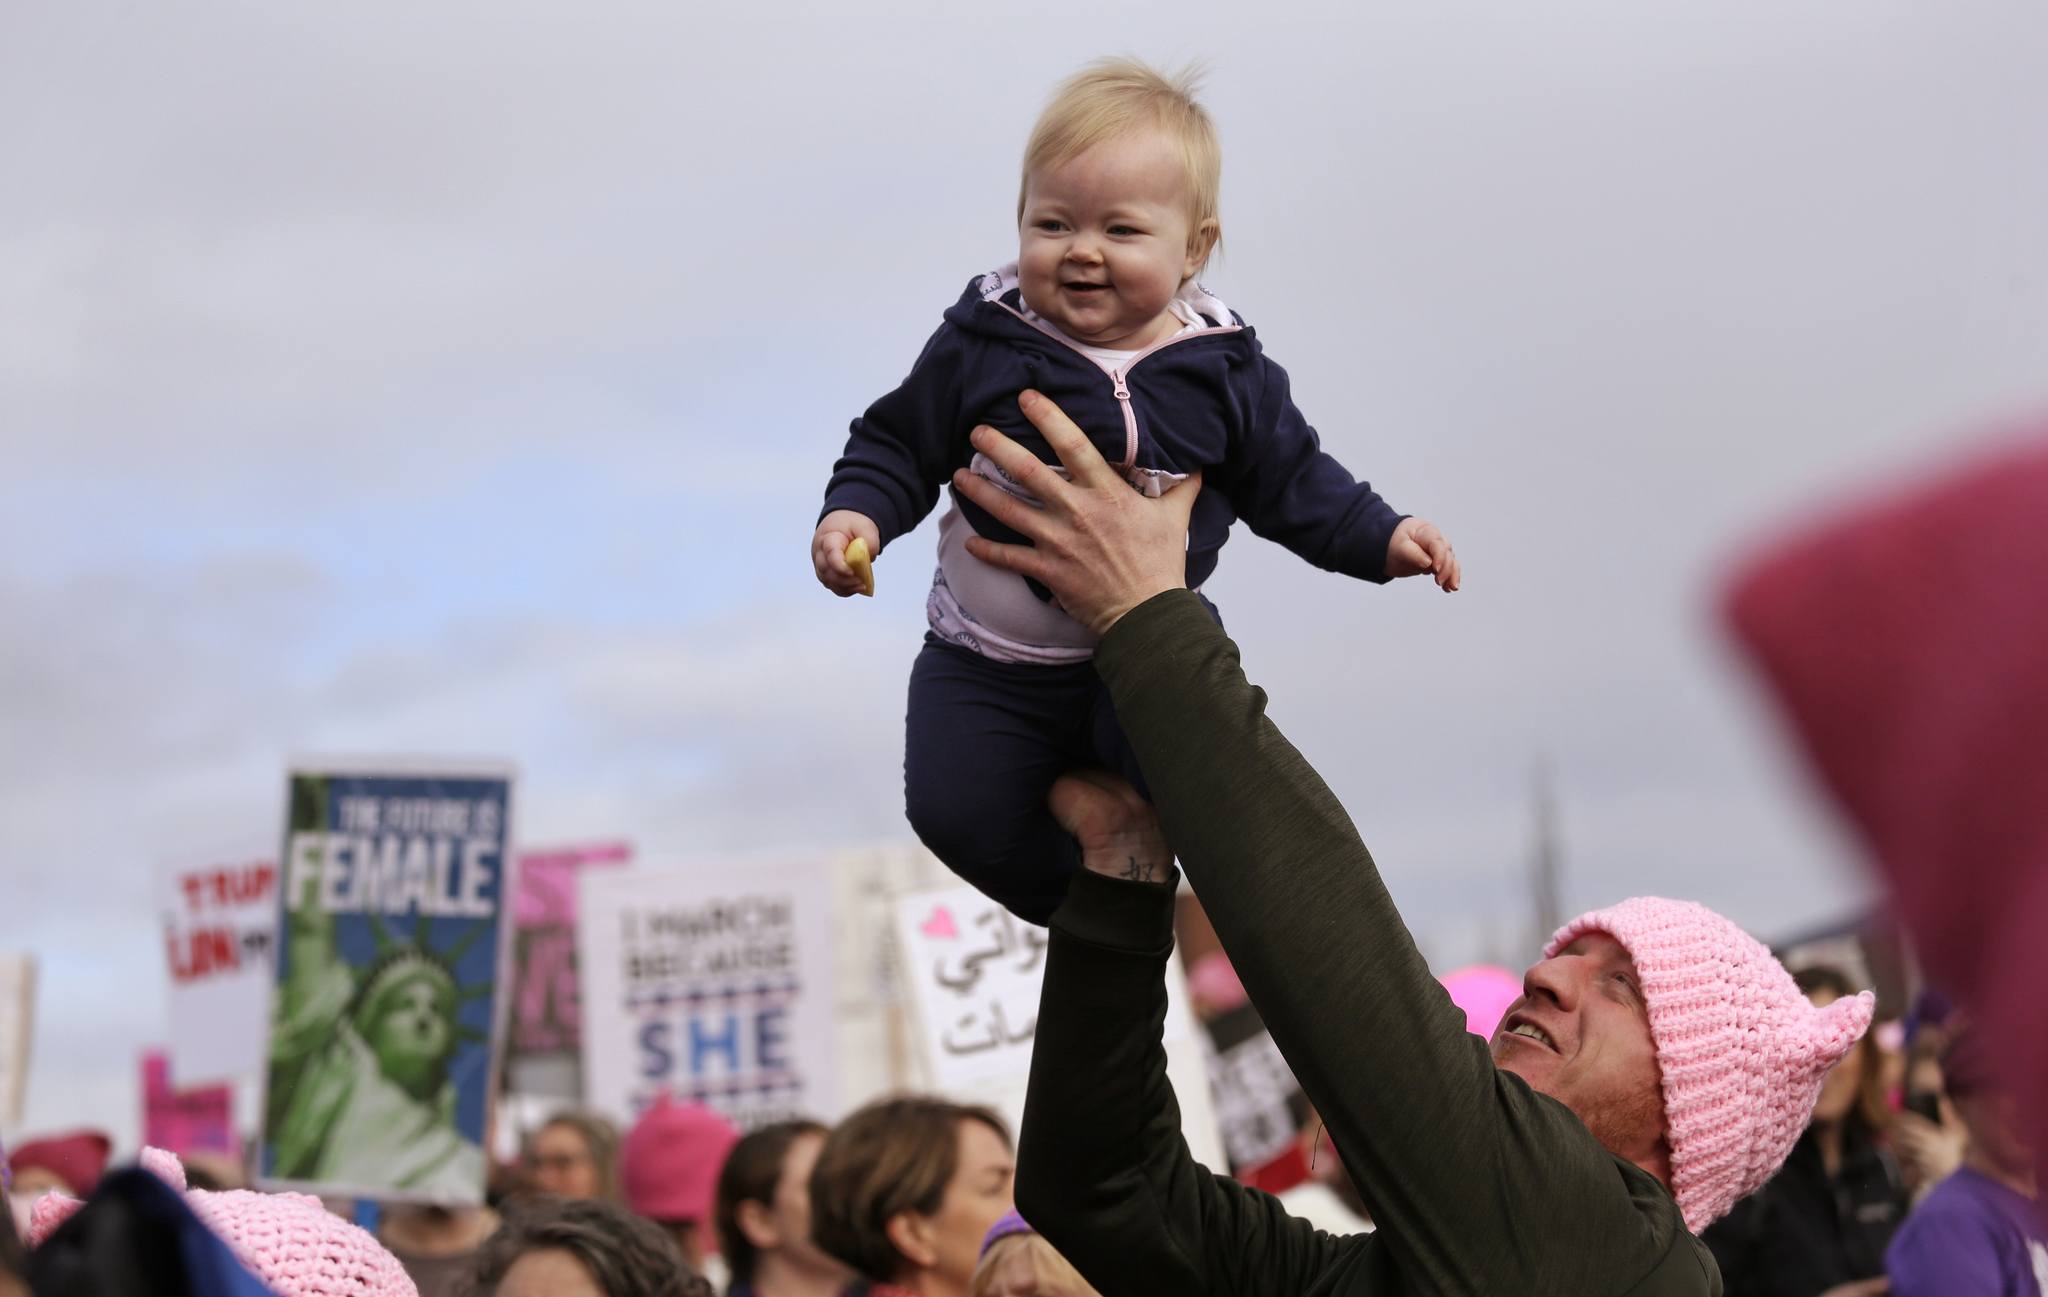 A man lifts a baby above the crowd before a women’s march Saturday in Seattle. (Elaine Thompson/The Associated Press)